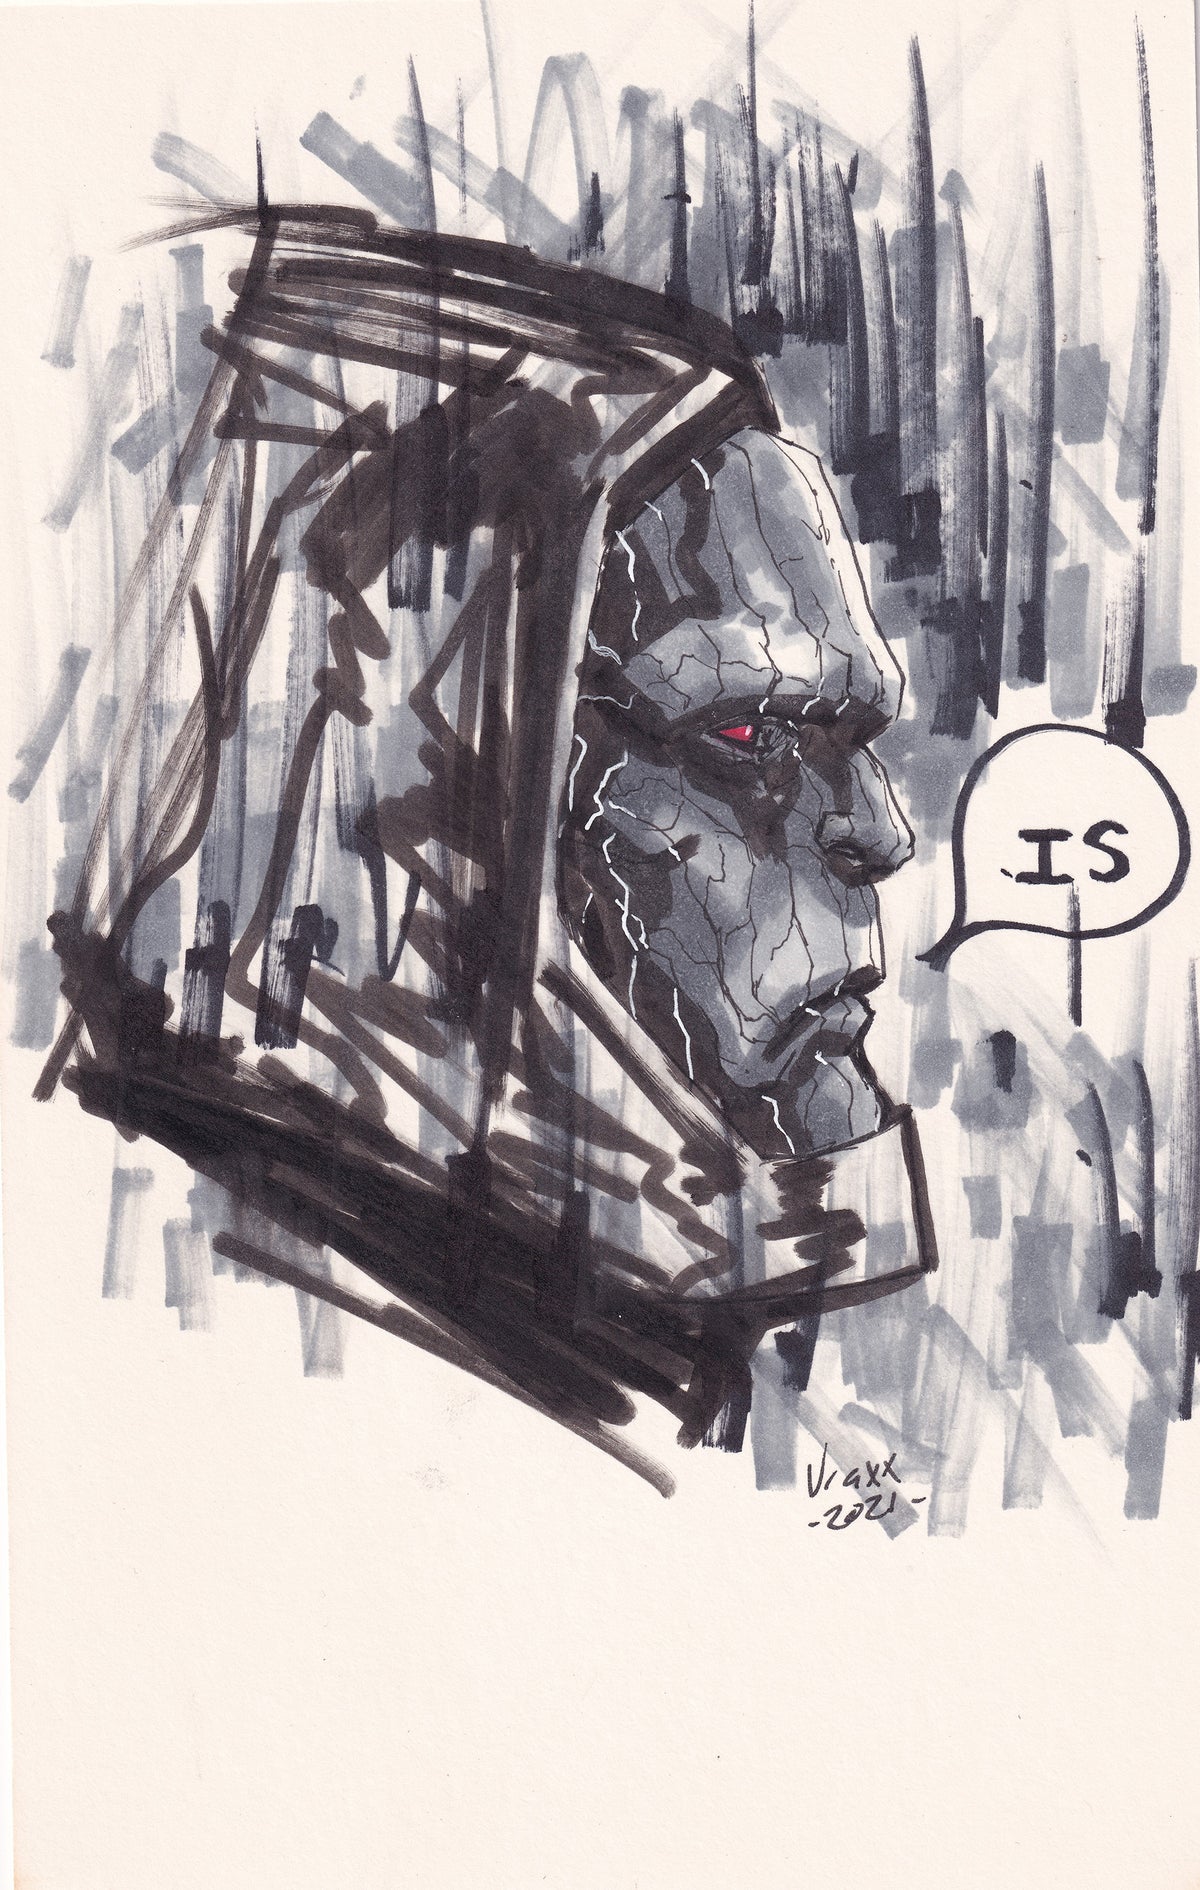 Darkseid 6 1/2" x 10 1/2" Copic Marker on comic backboard sold by Stronghold Collectibles